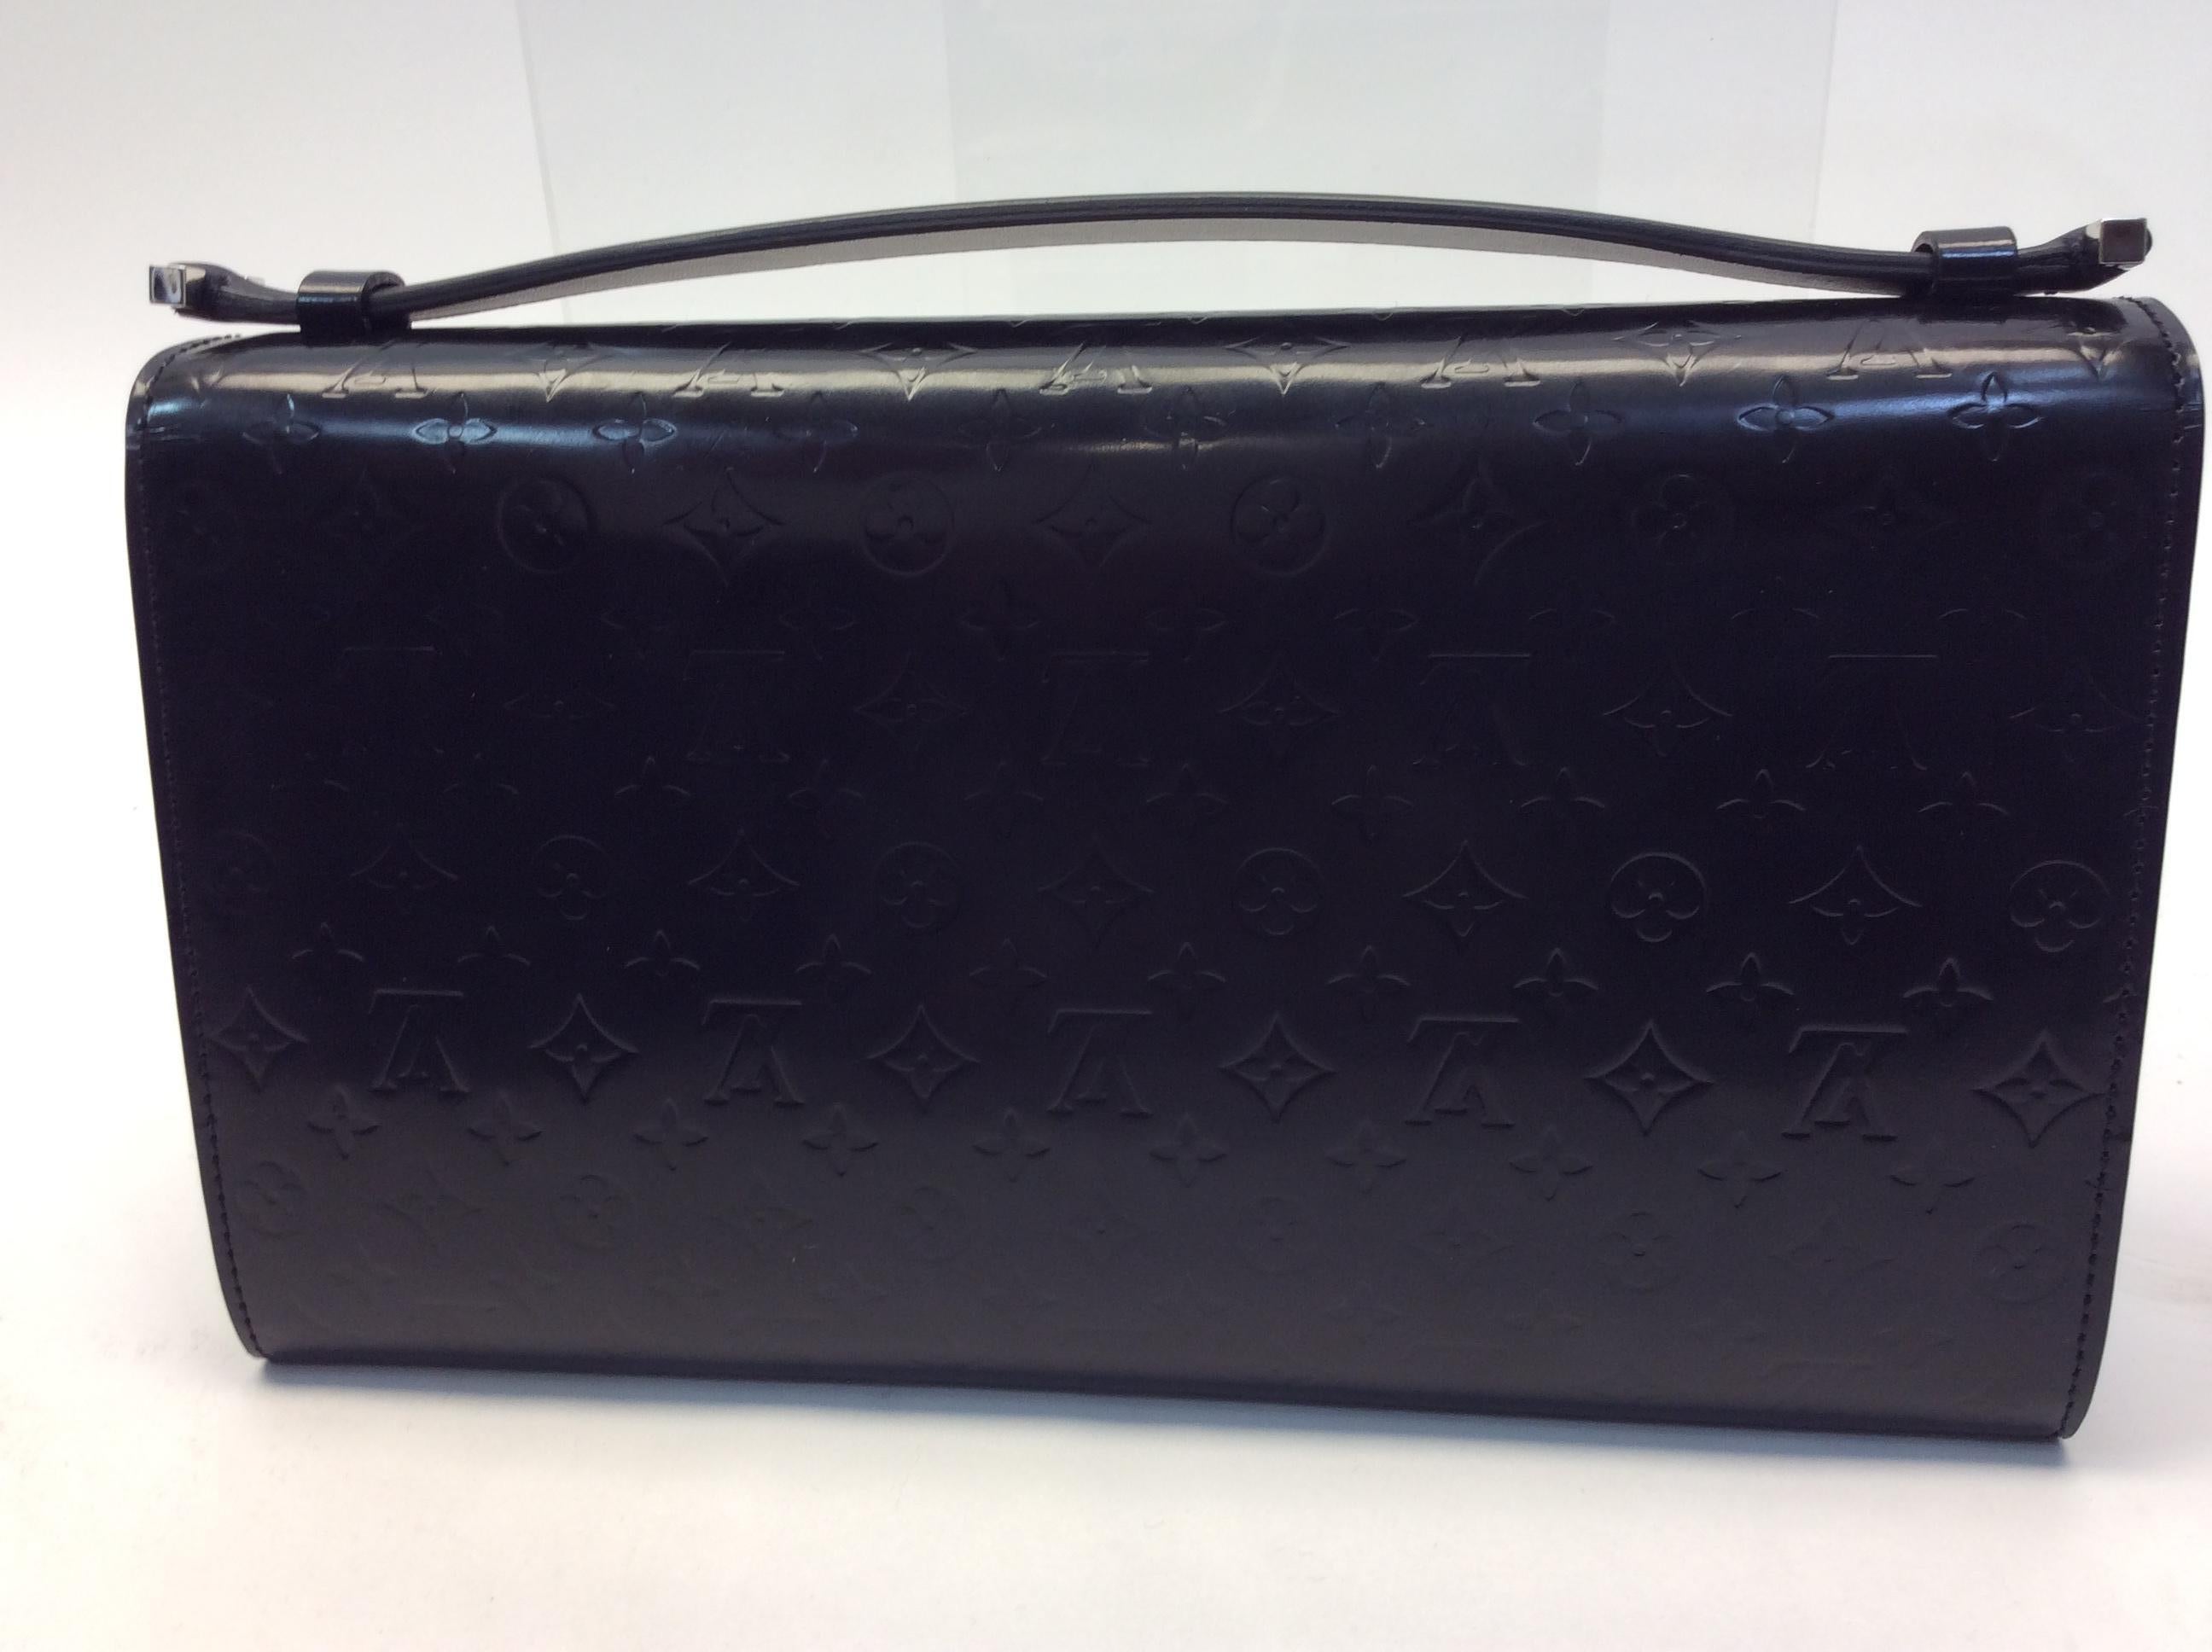 Louis Vuitton Black Patent Leather Clutch In Good Condition For Sale In Narberth, PA